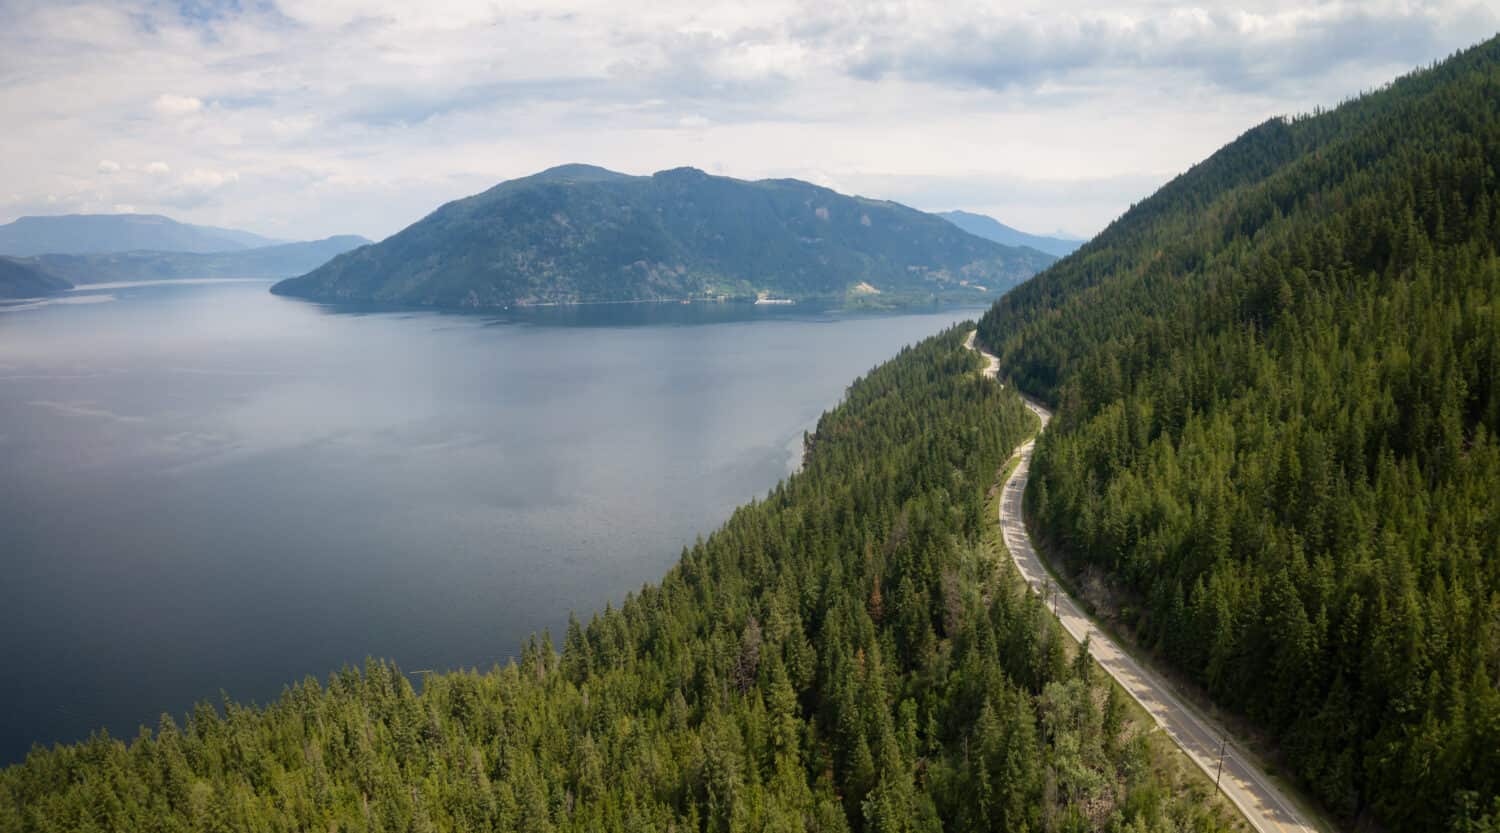 Aerial view of Trans-Canada Highway during a vibrant sunny summer day. Taken near Shuswap Lake, Sicamous, BC, Canada.